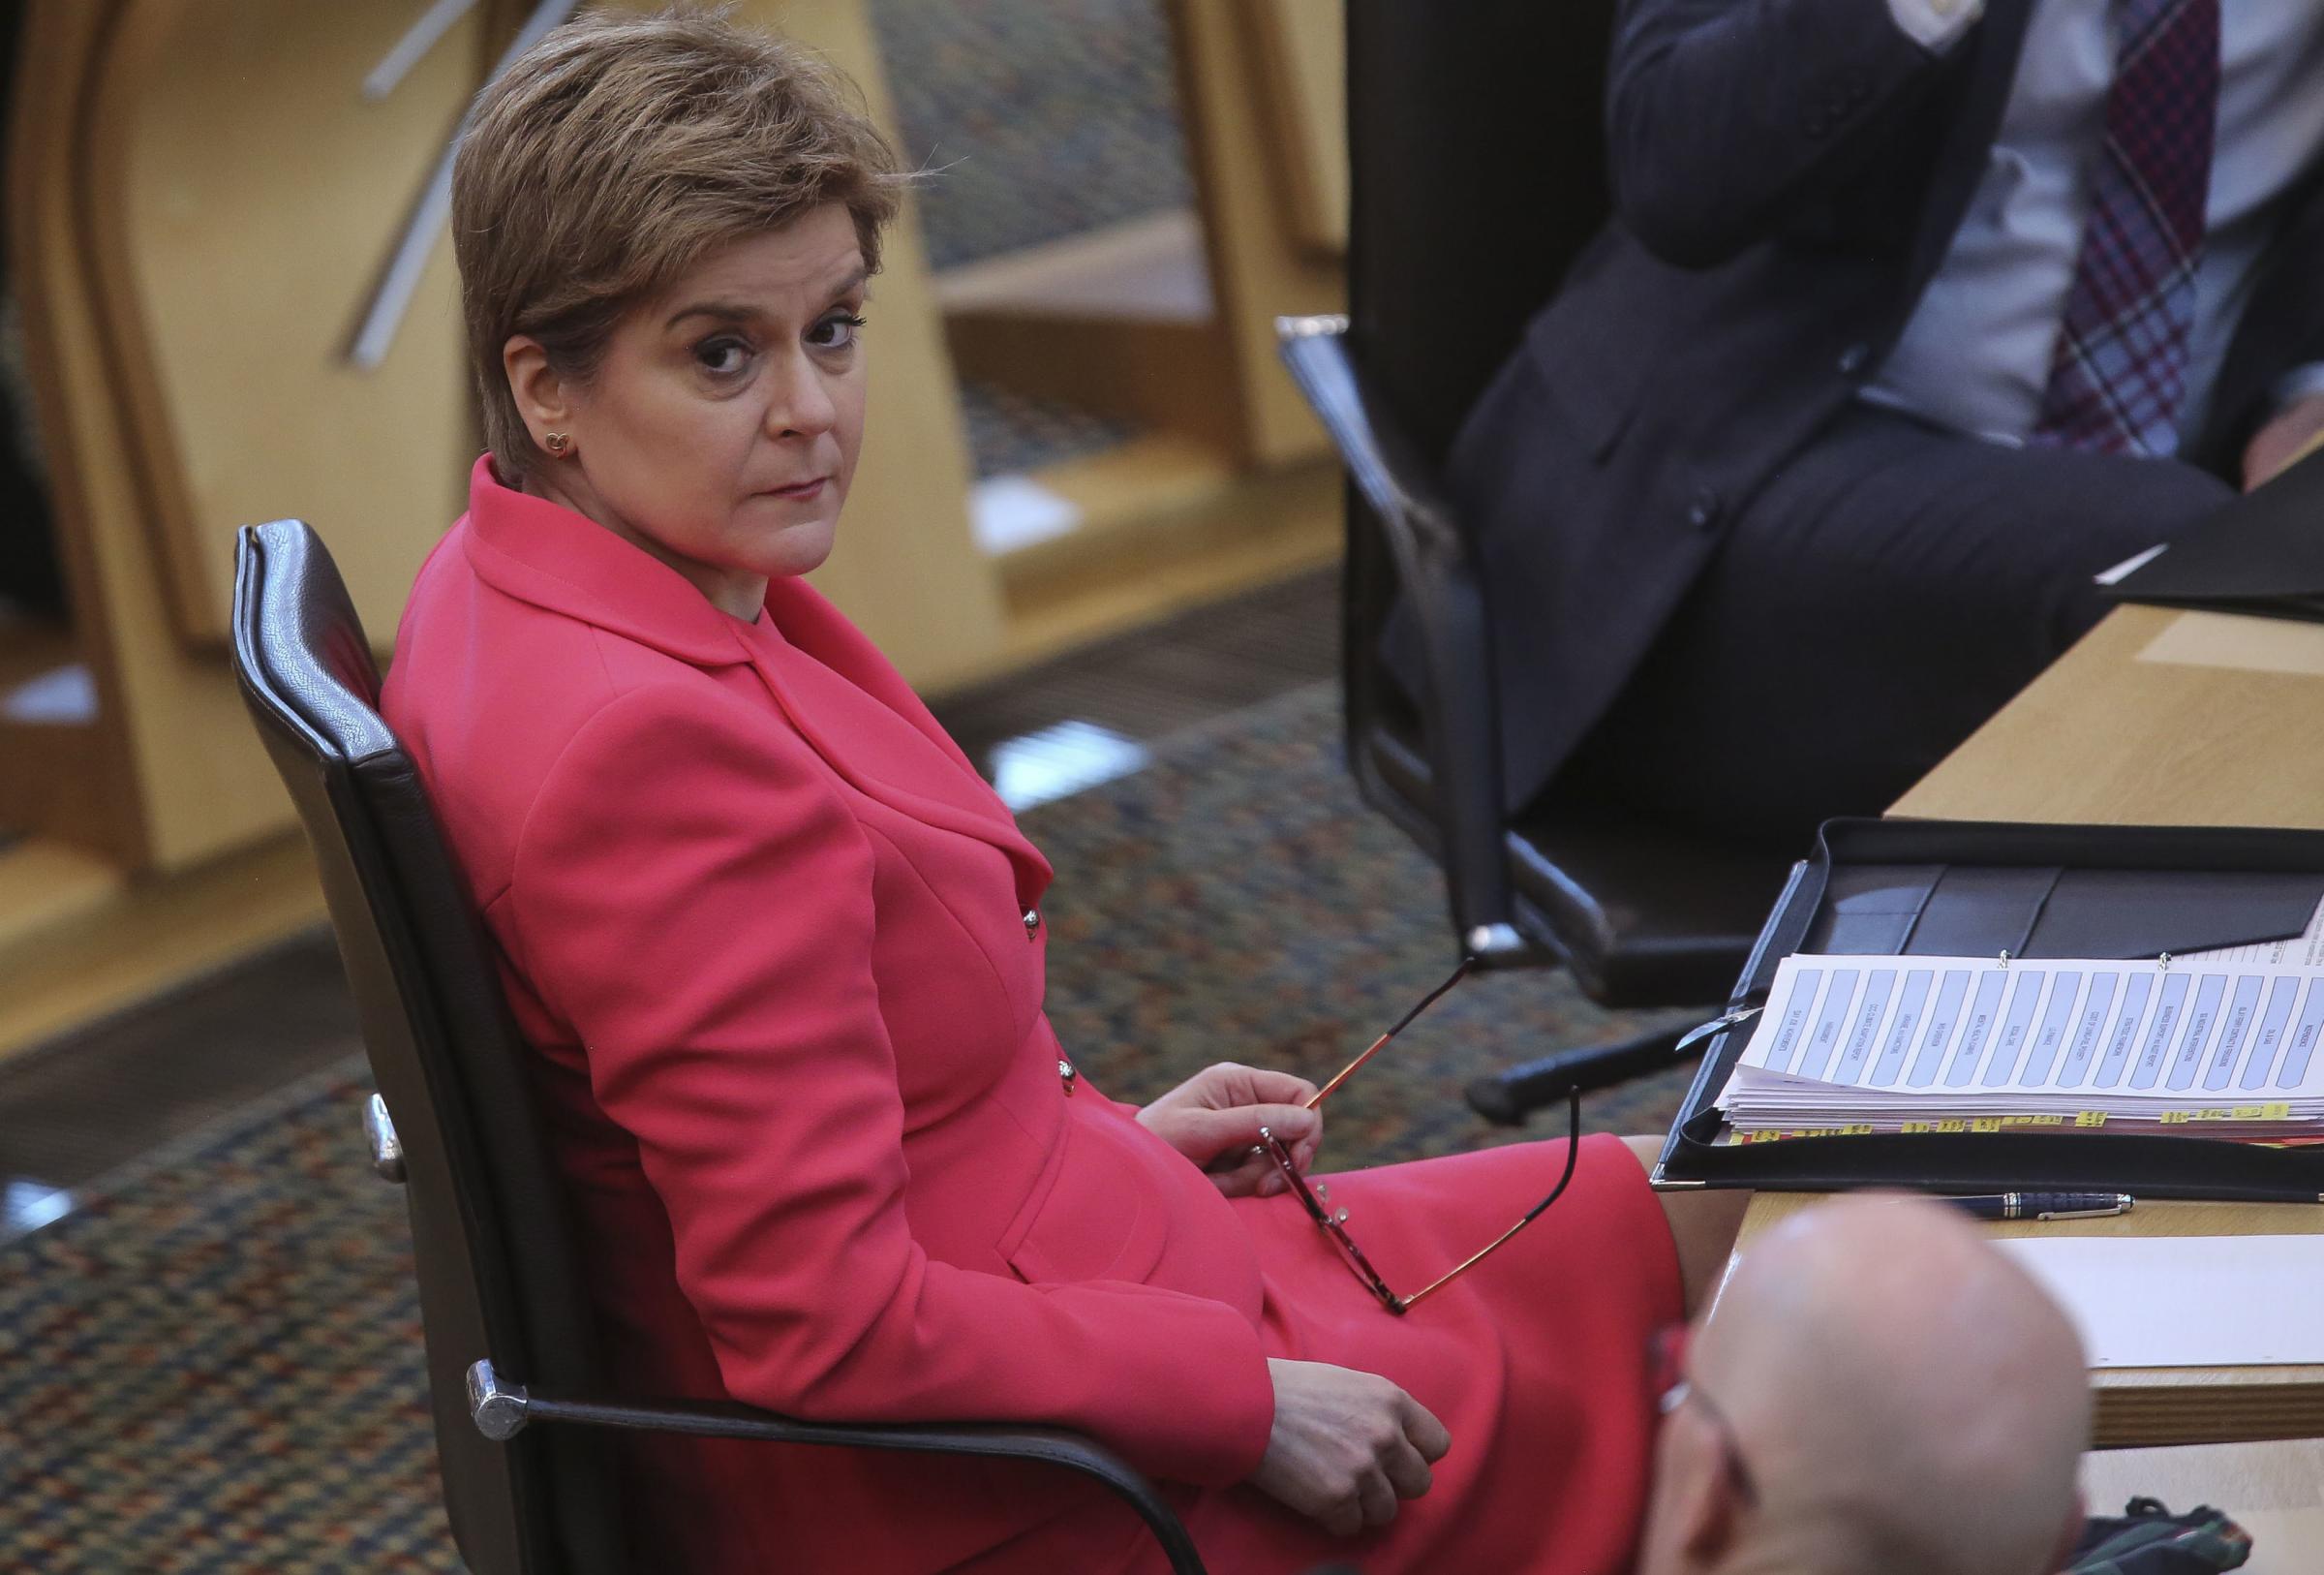 Scottish Tories lash out at Nicola Sturgeon after National essay on indyref2 urgency